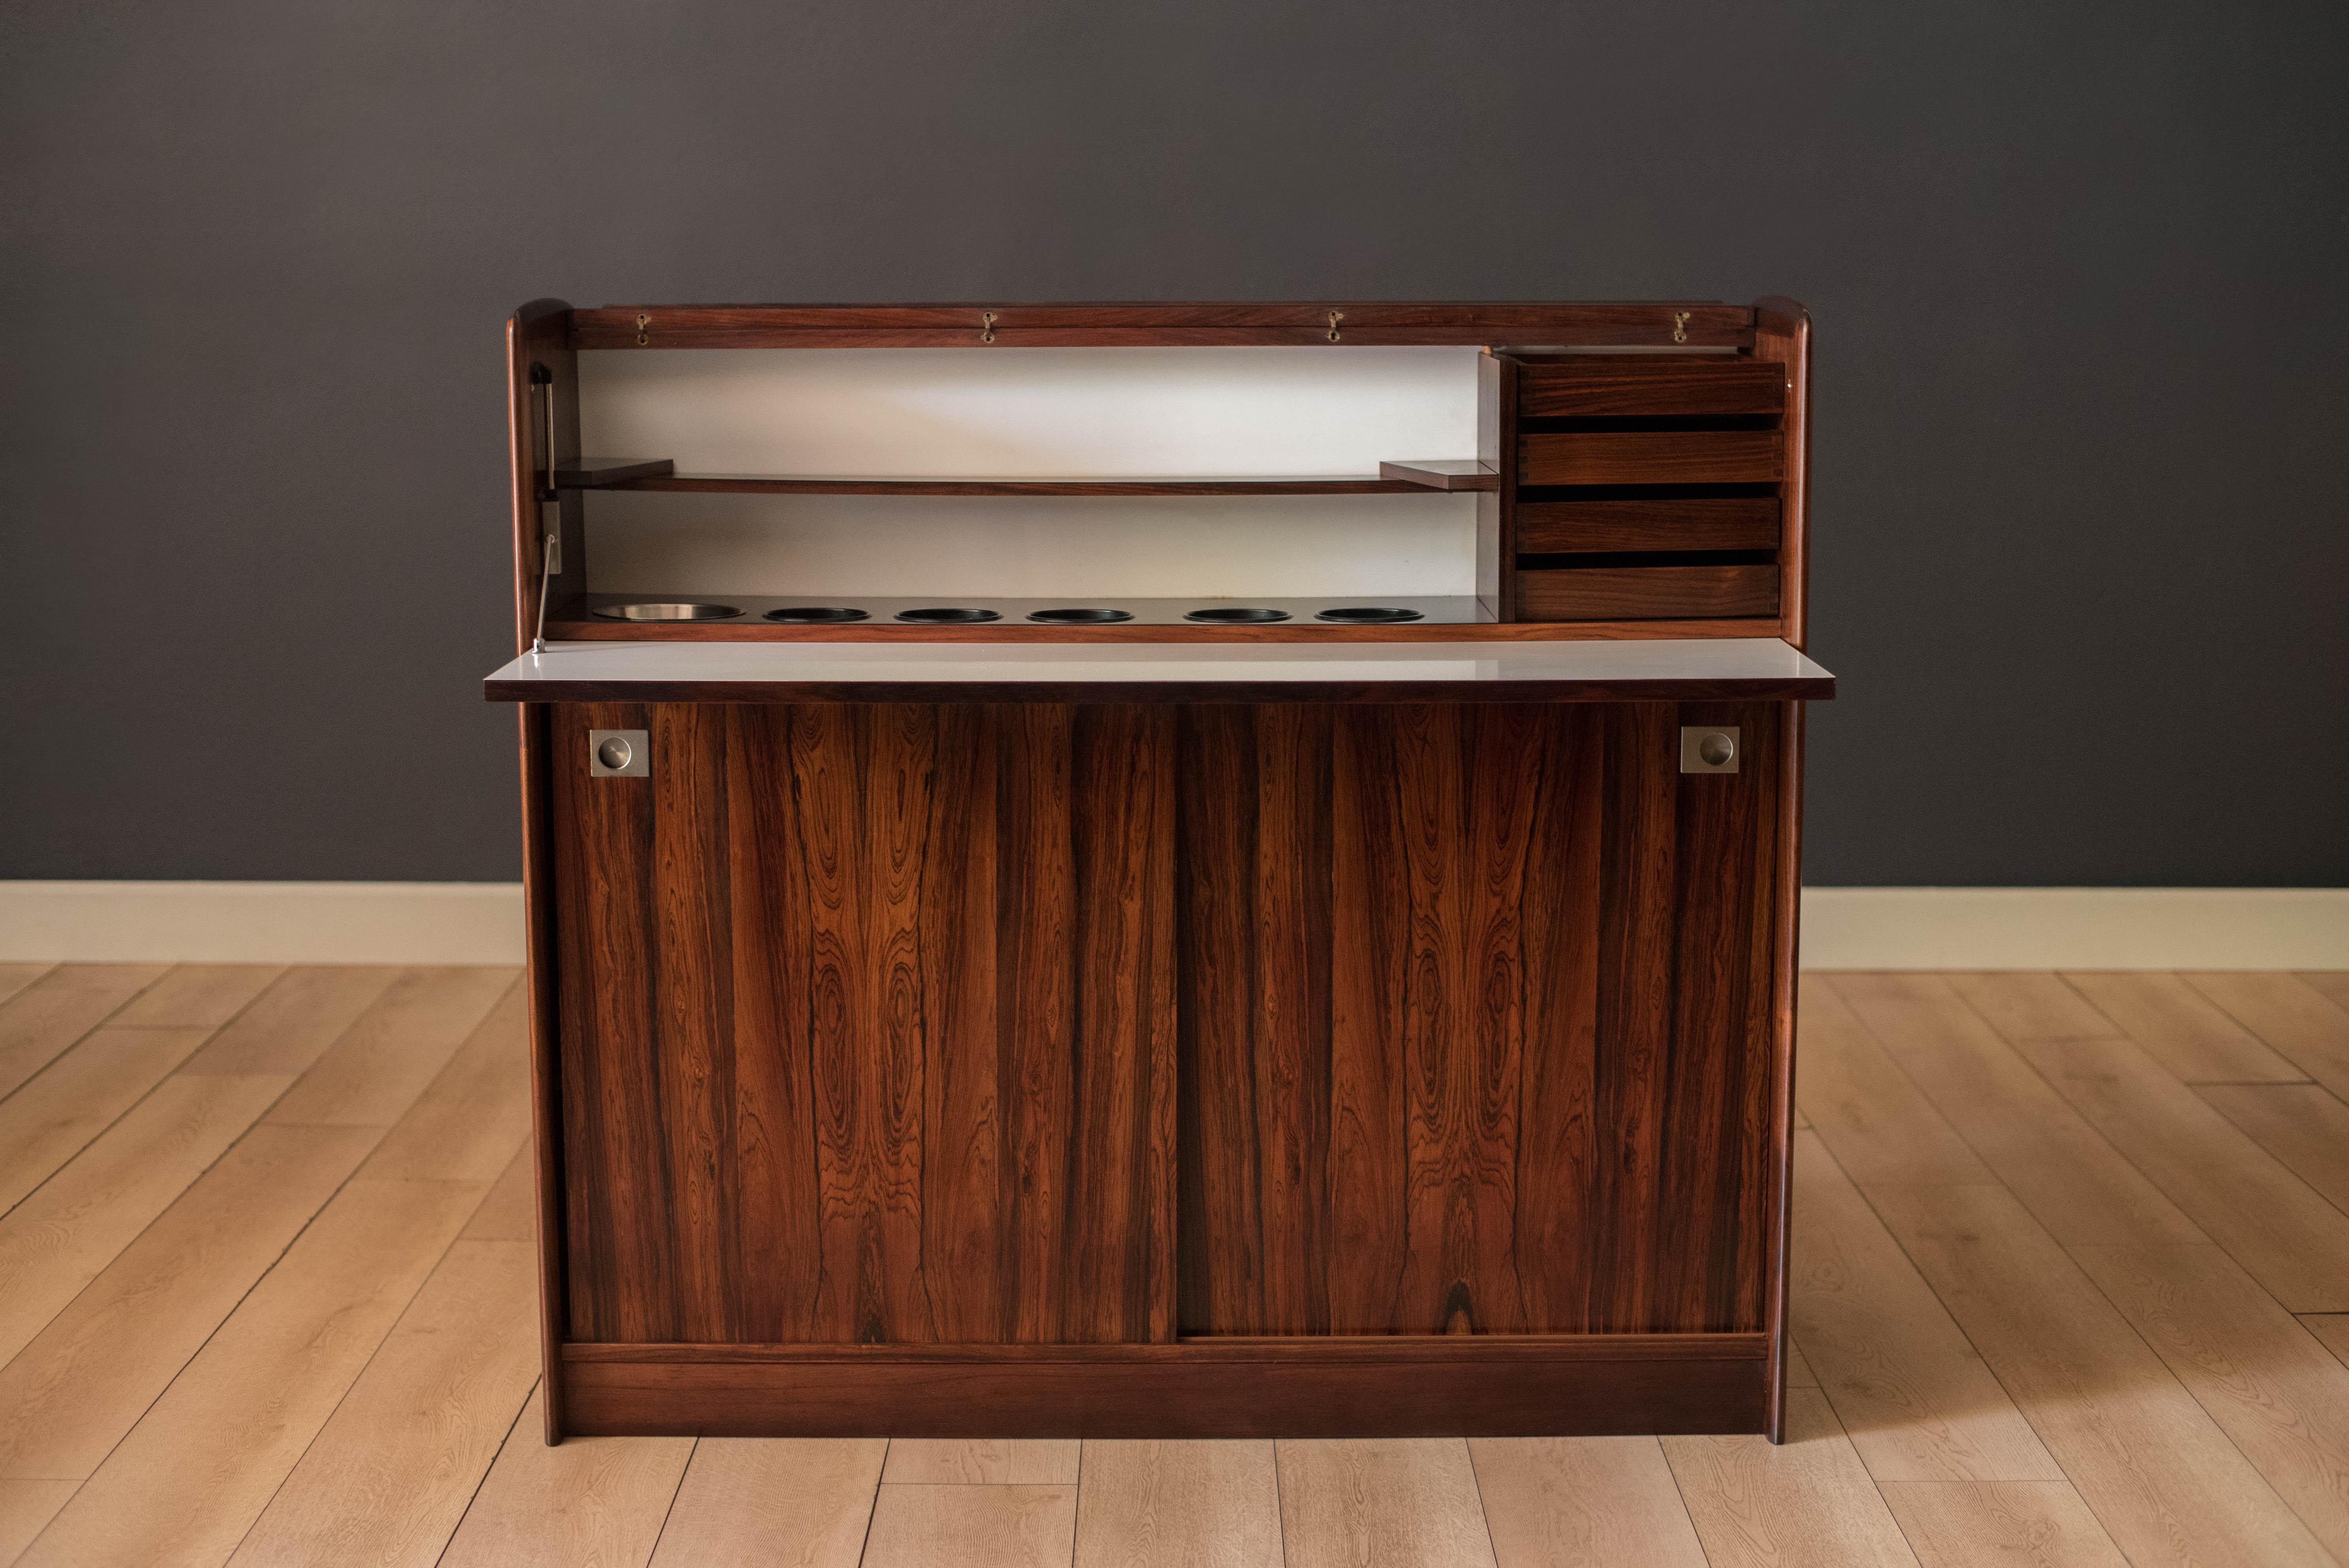 Rosewood Danish Modern Dry Bar Credenza Cabinet In Good Condition For Sale In San Jose, CA